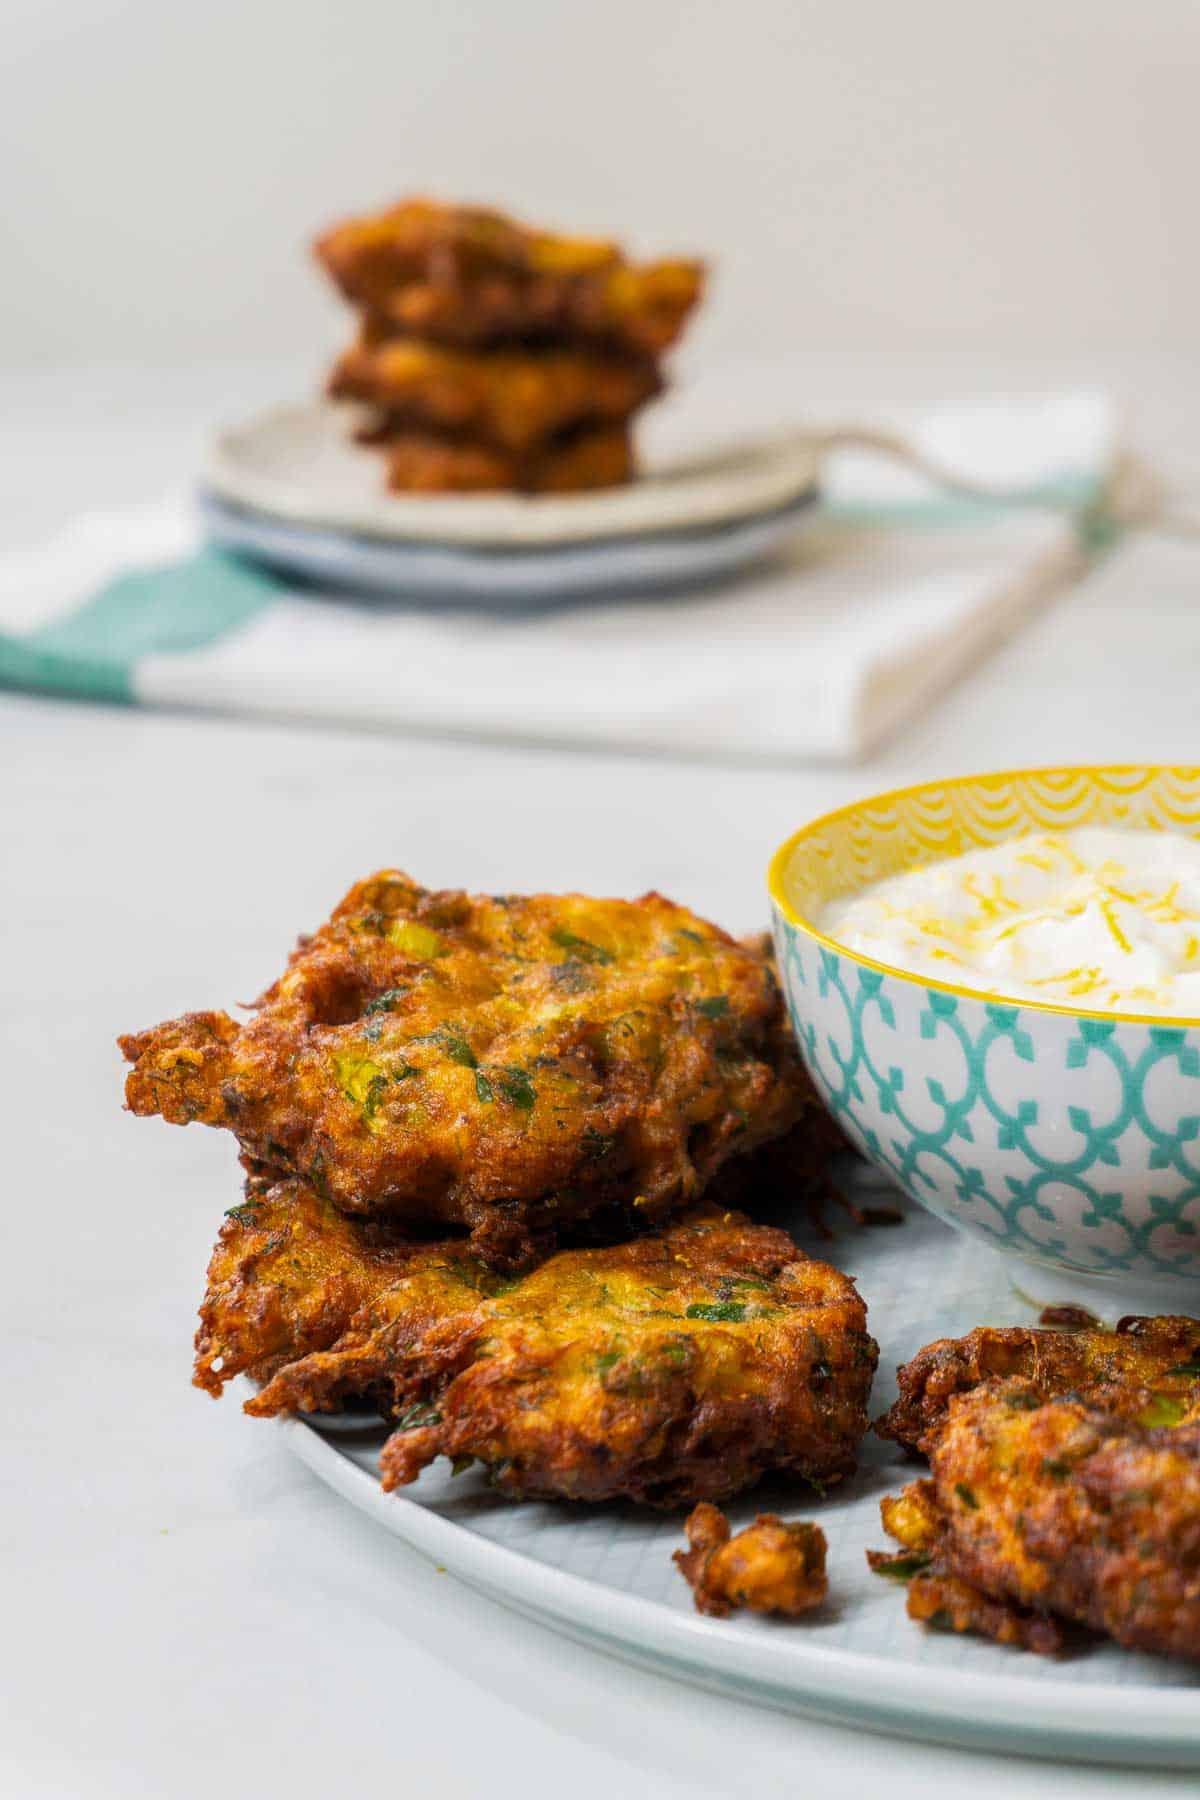 Turkish Courgette Fritters on a plate next to a bowl of yoghurt dip.